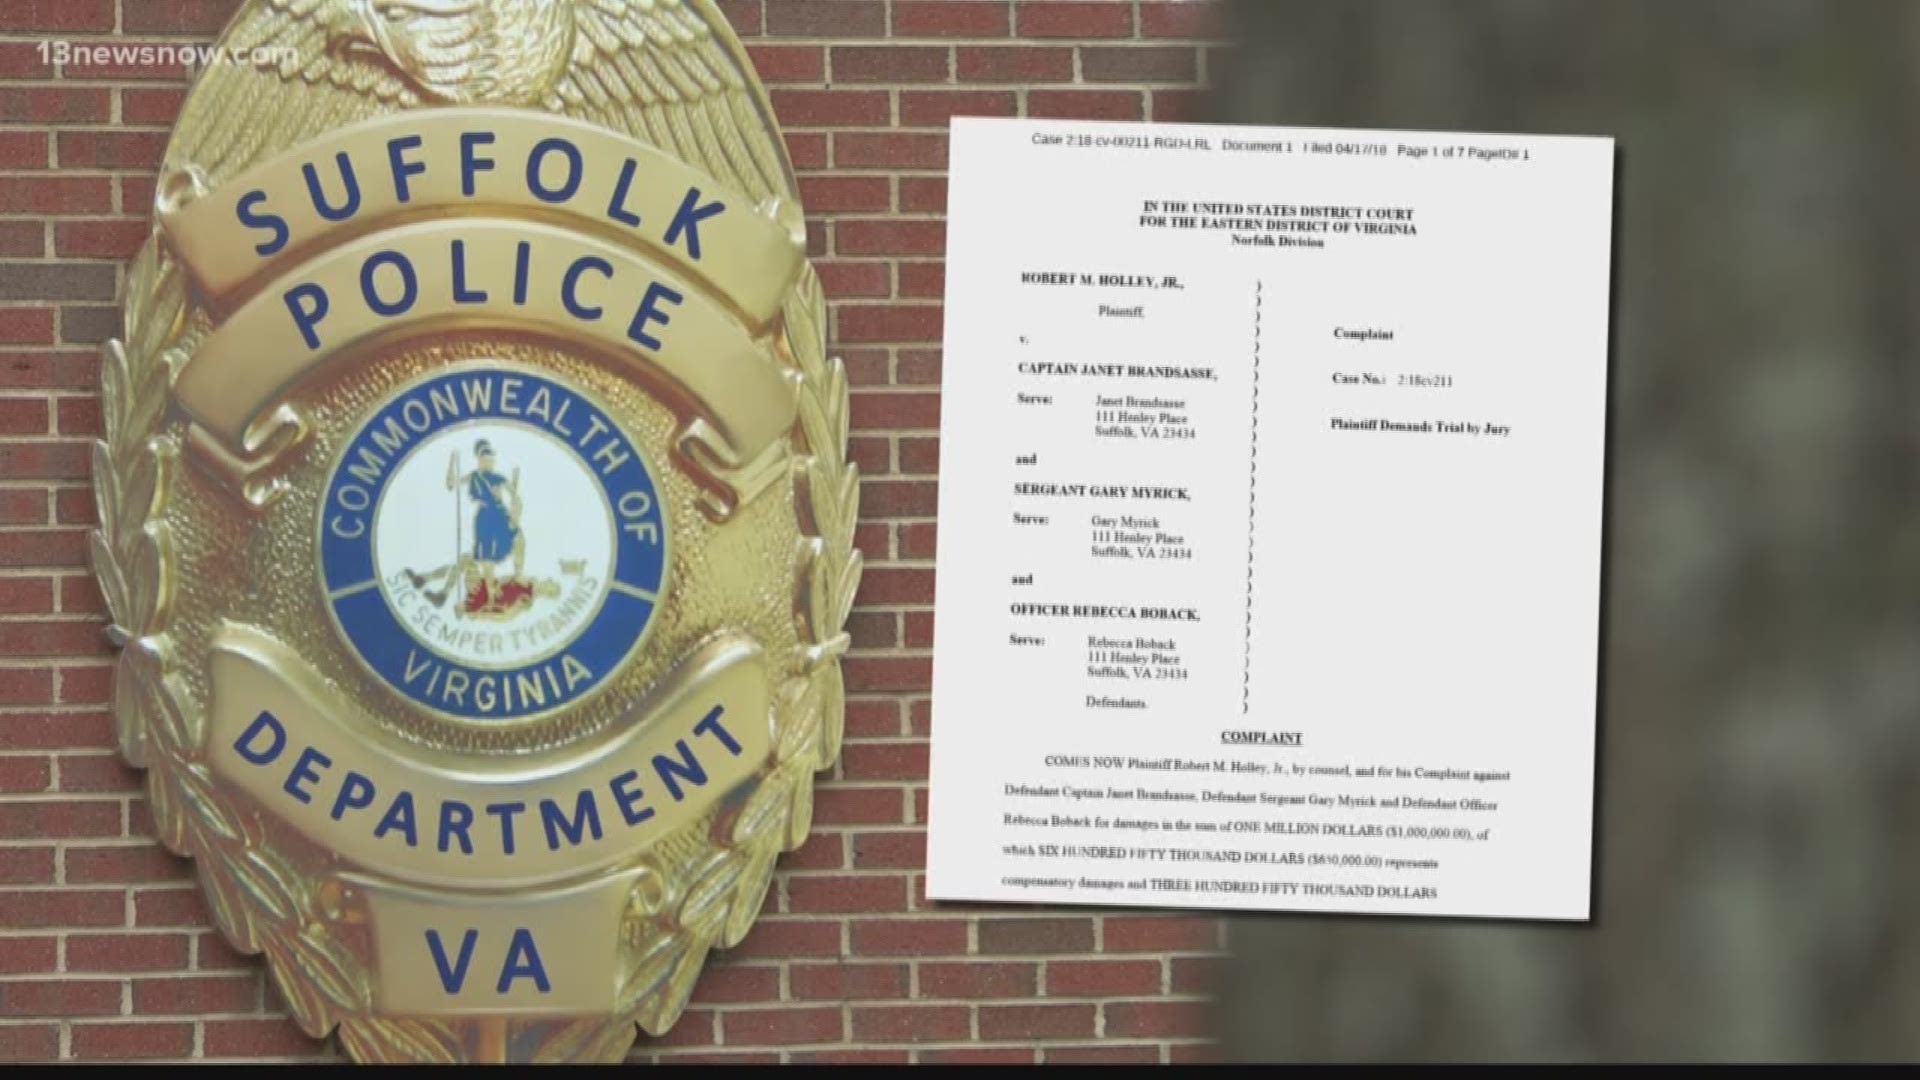 A Portsmouth Police Officer is filing a lawsuit claiming 3 Suffolk officers violated his constitutional rights.